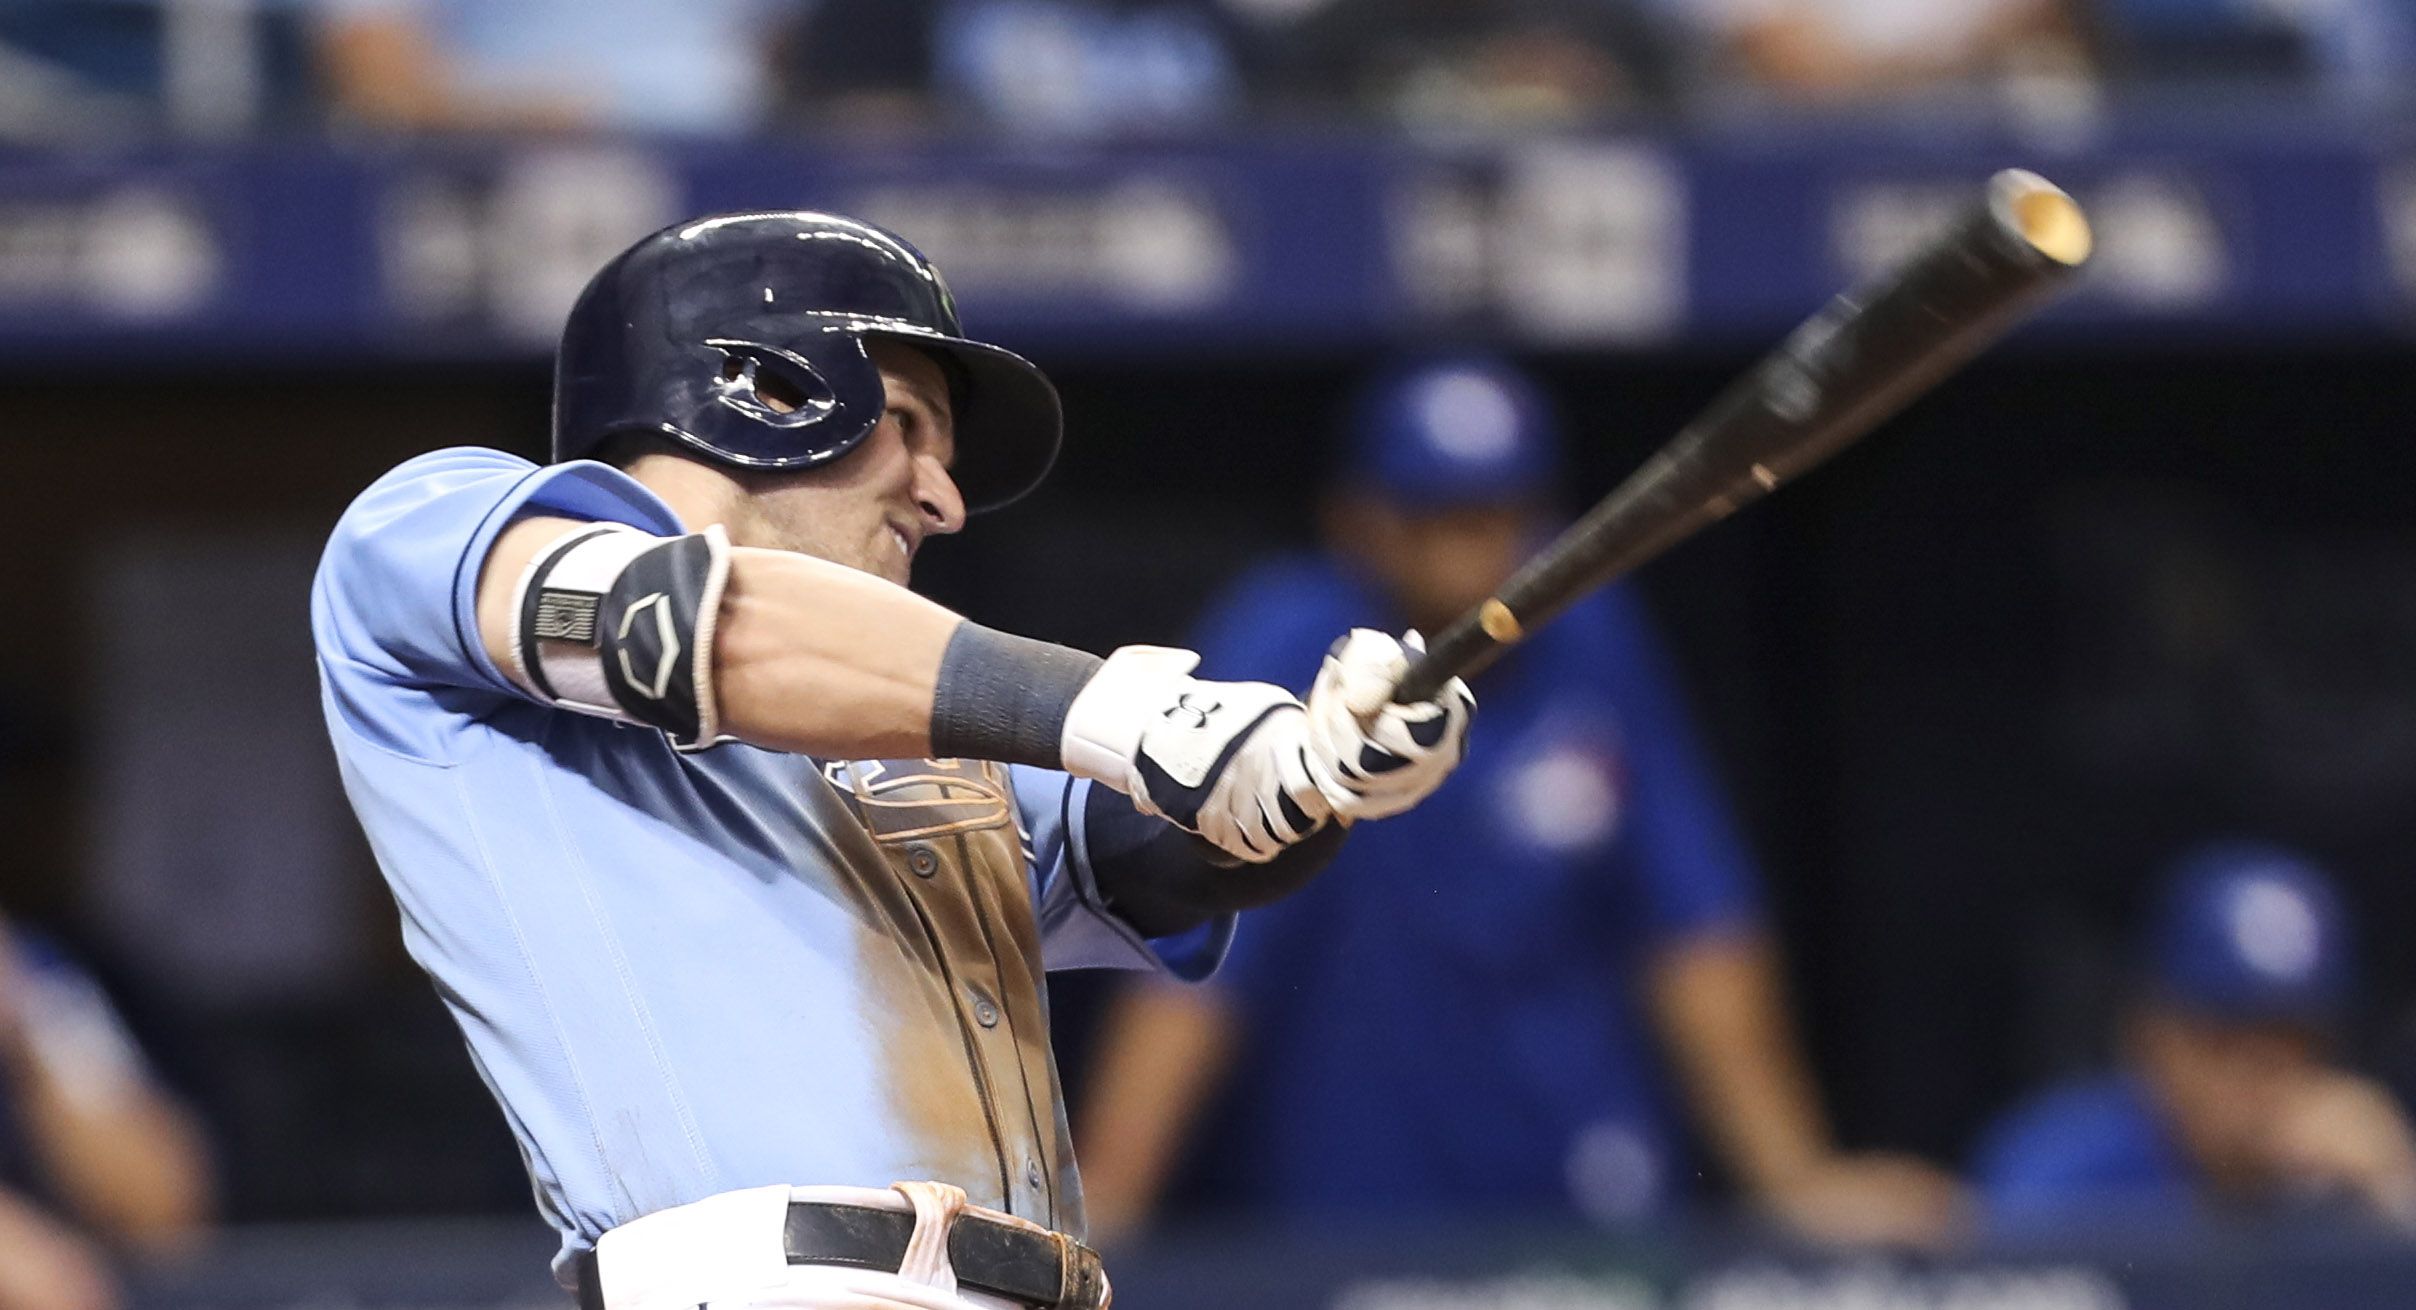 Rays Tales: Evan Longoria deserves All-Star nod, could get